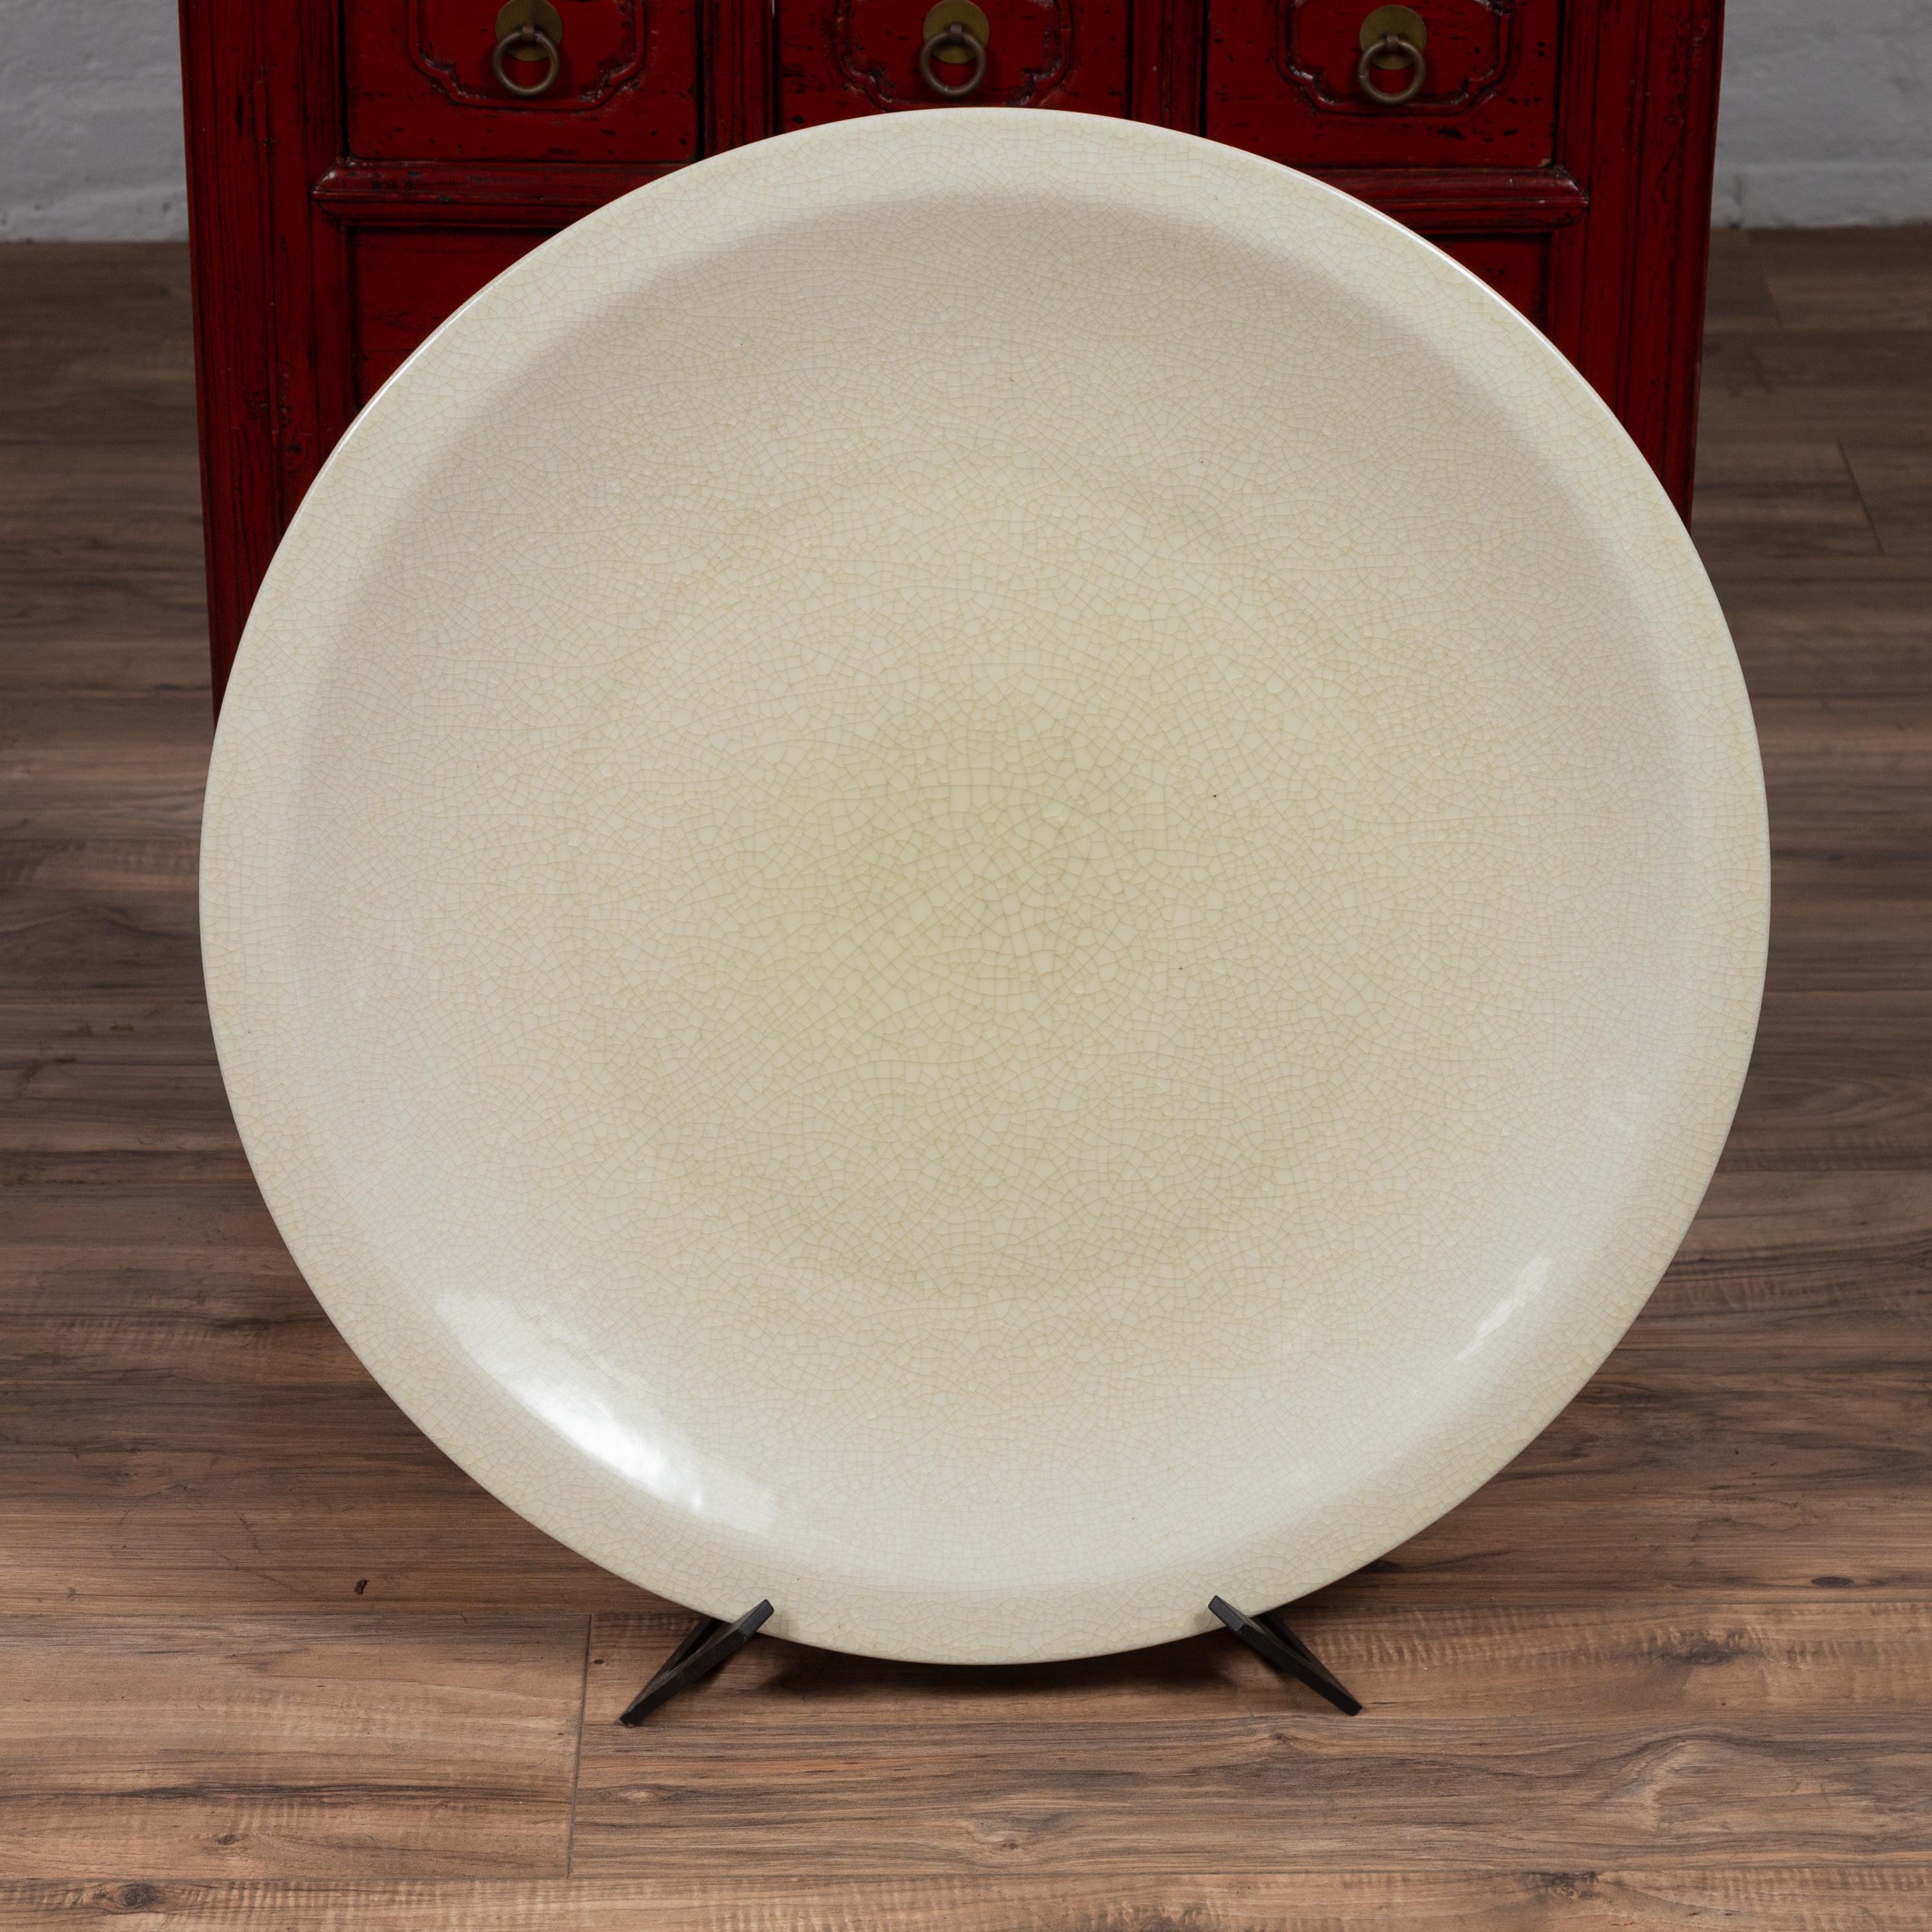 A Chinese vintage beige ceramic charger plate from the second half of the 20th century. We have two beige chargers available, priced and sold individually. Born in China during the 1980s, this elegant charger plate features a charming beige color